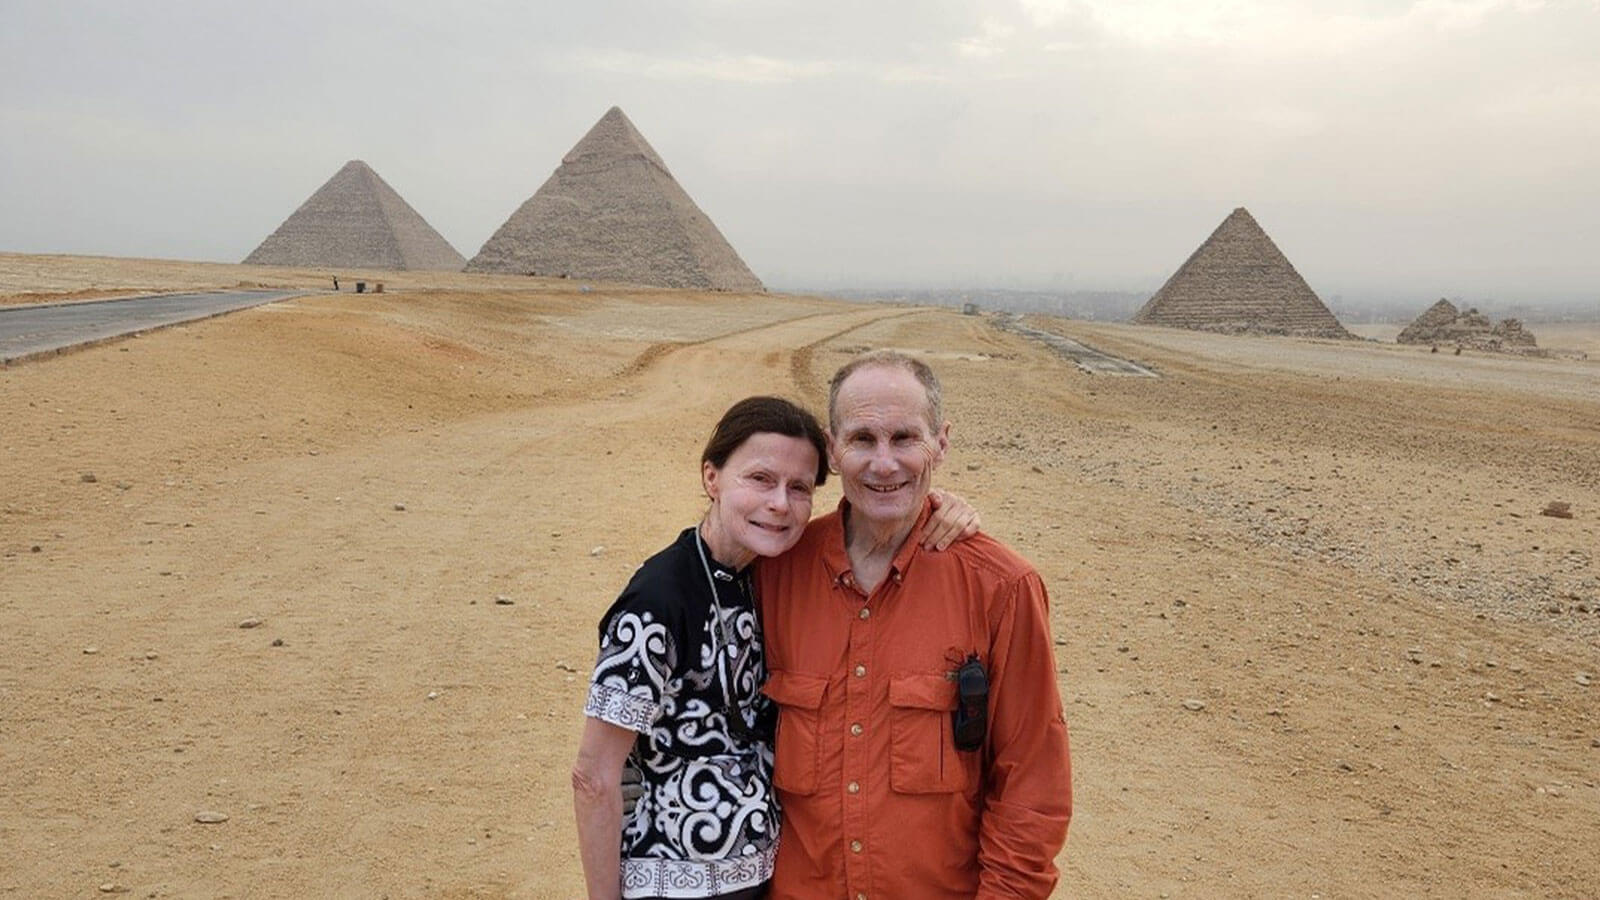 Bruce and Chris in front of pyramids